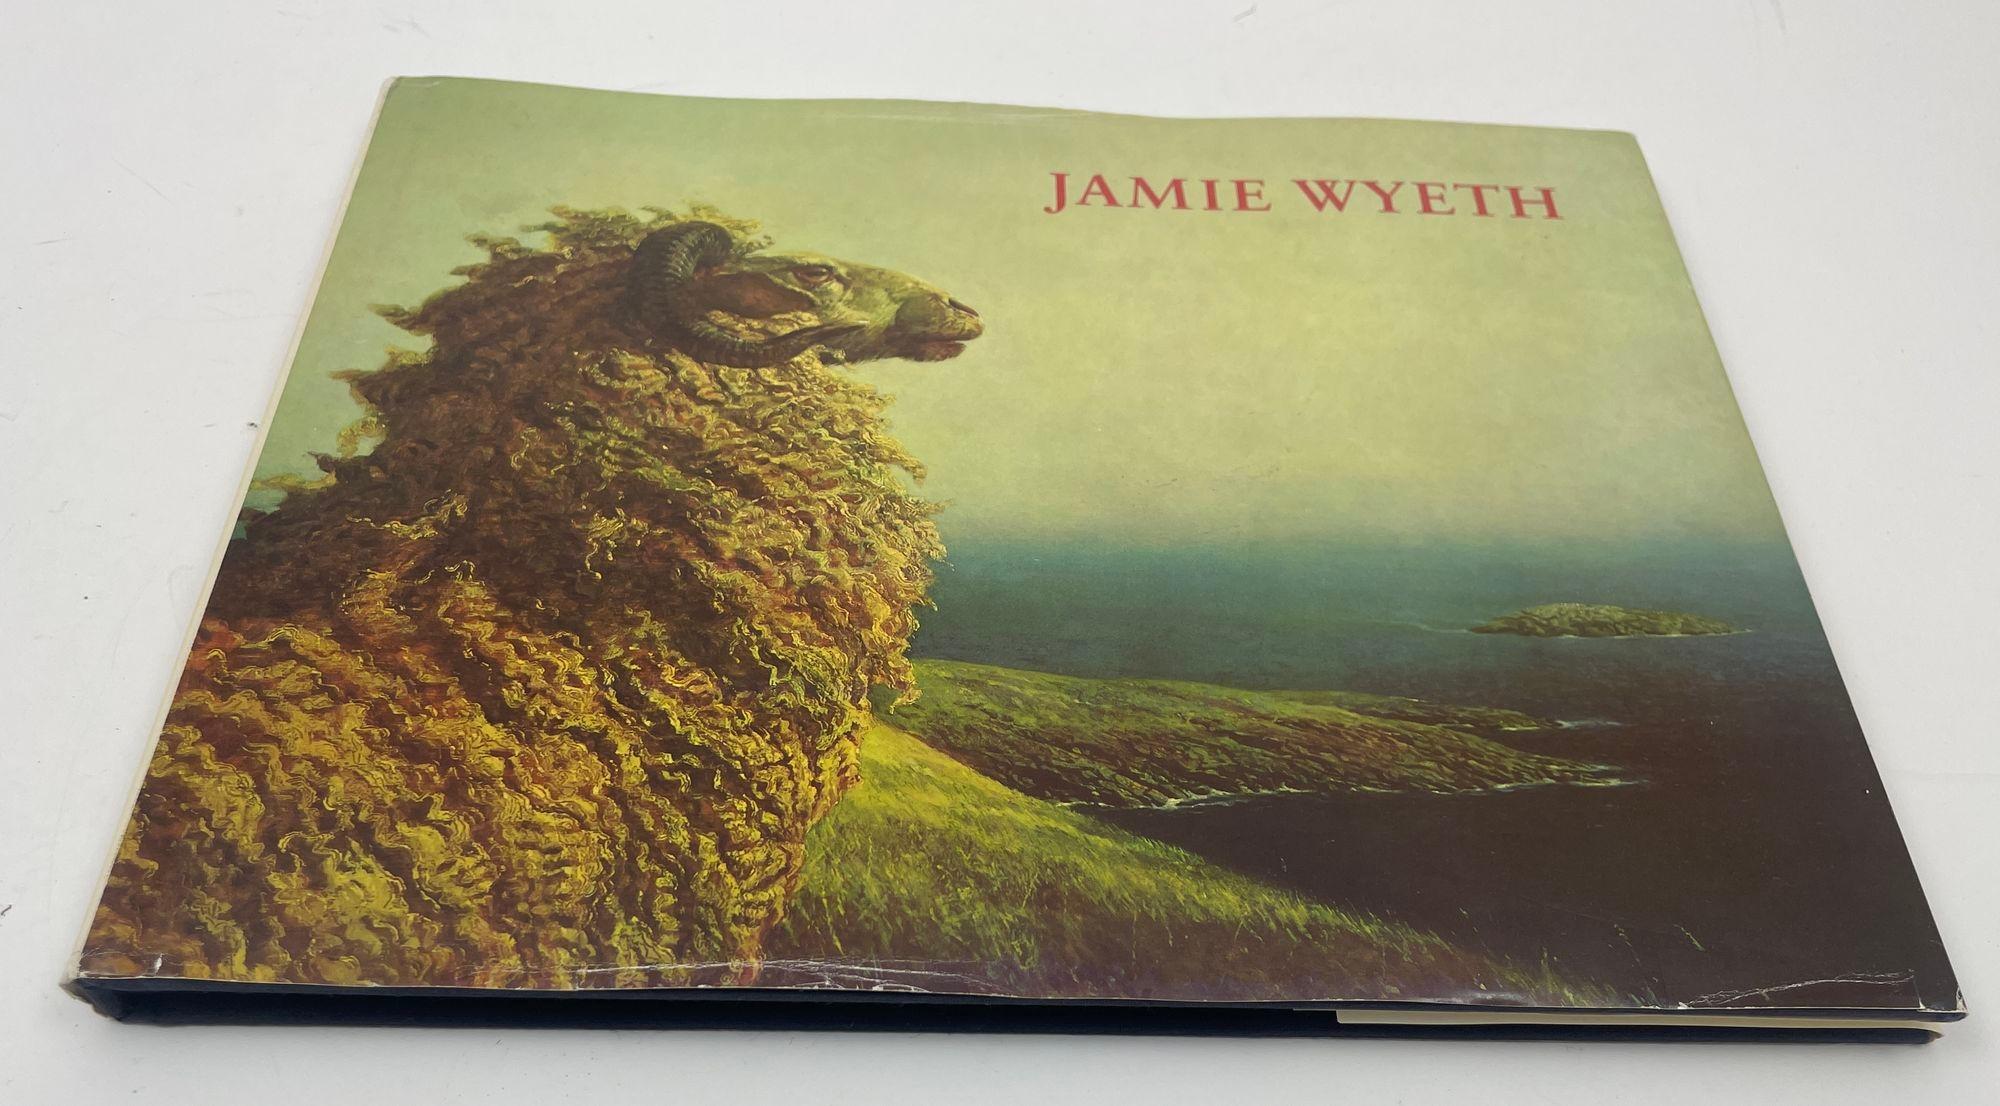 Jamie Wyeth by Jamie Wyeth Book.
Published by Houghton Mifflin, Boston, 1980.
Title: Jamie Wyeth
Publisher: Houghton Mifflin, Boston
Publication Date: 1980
Binding: Hardcover
Condition: Fine
Dust Jacket Condition: Good
Edition: First Edition.
James